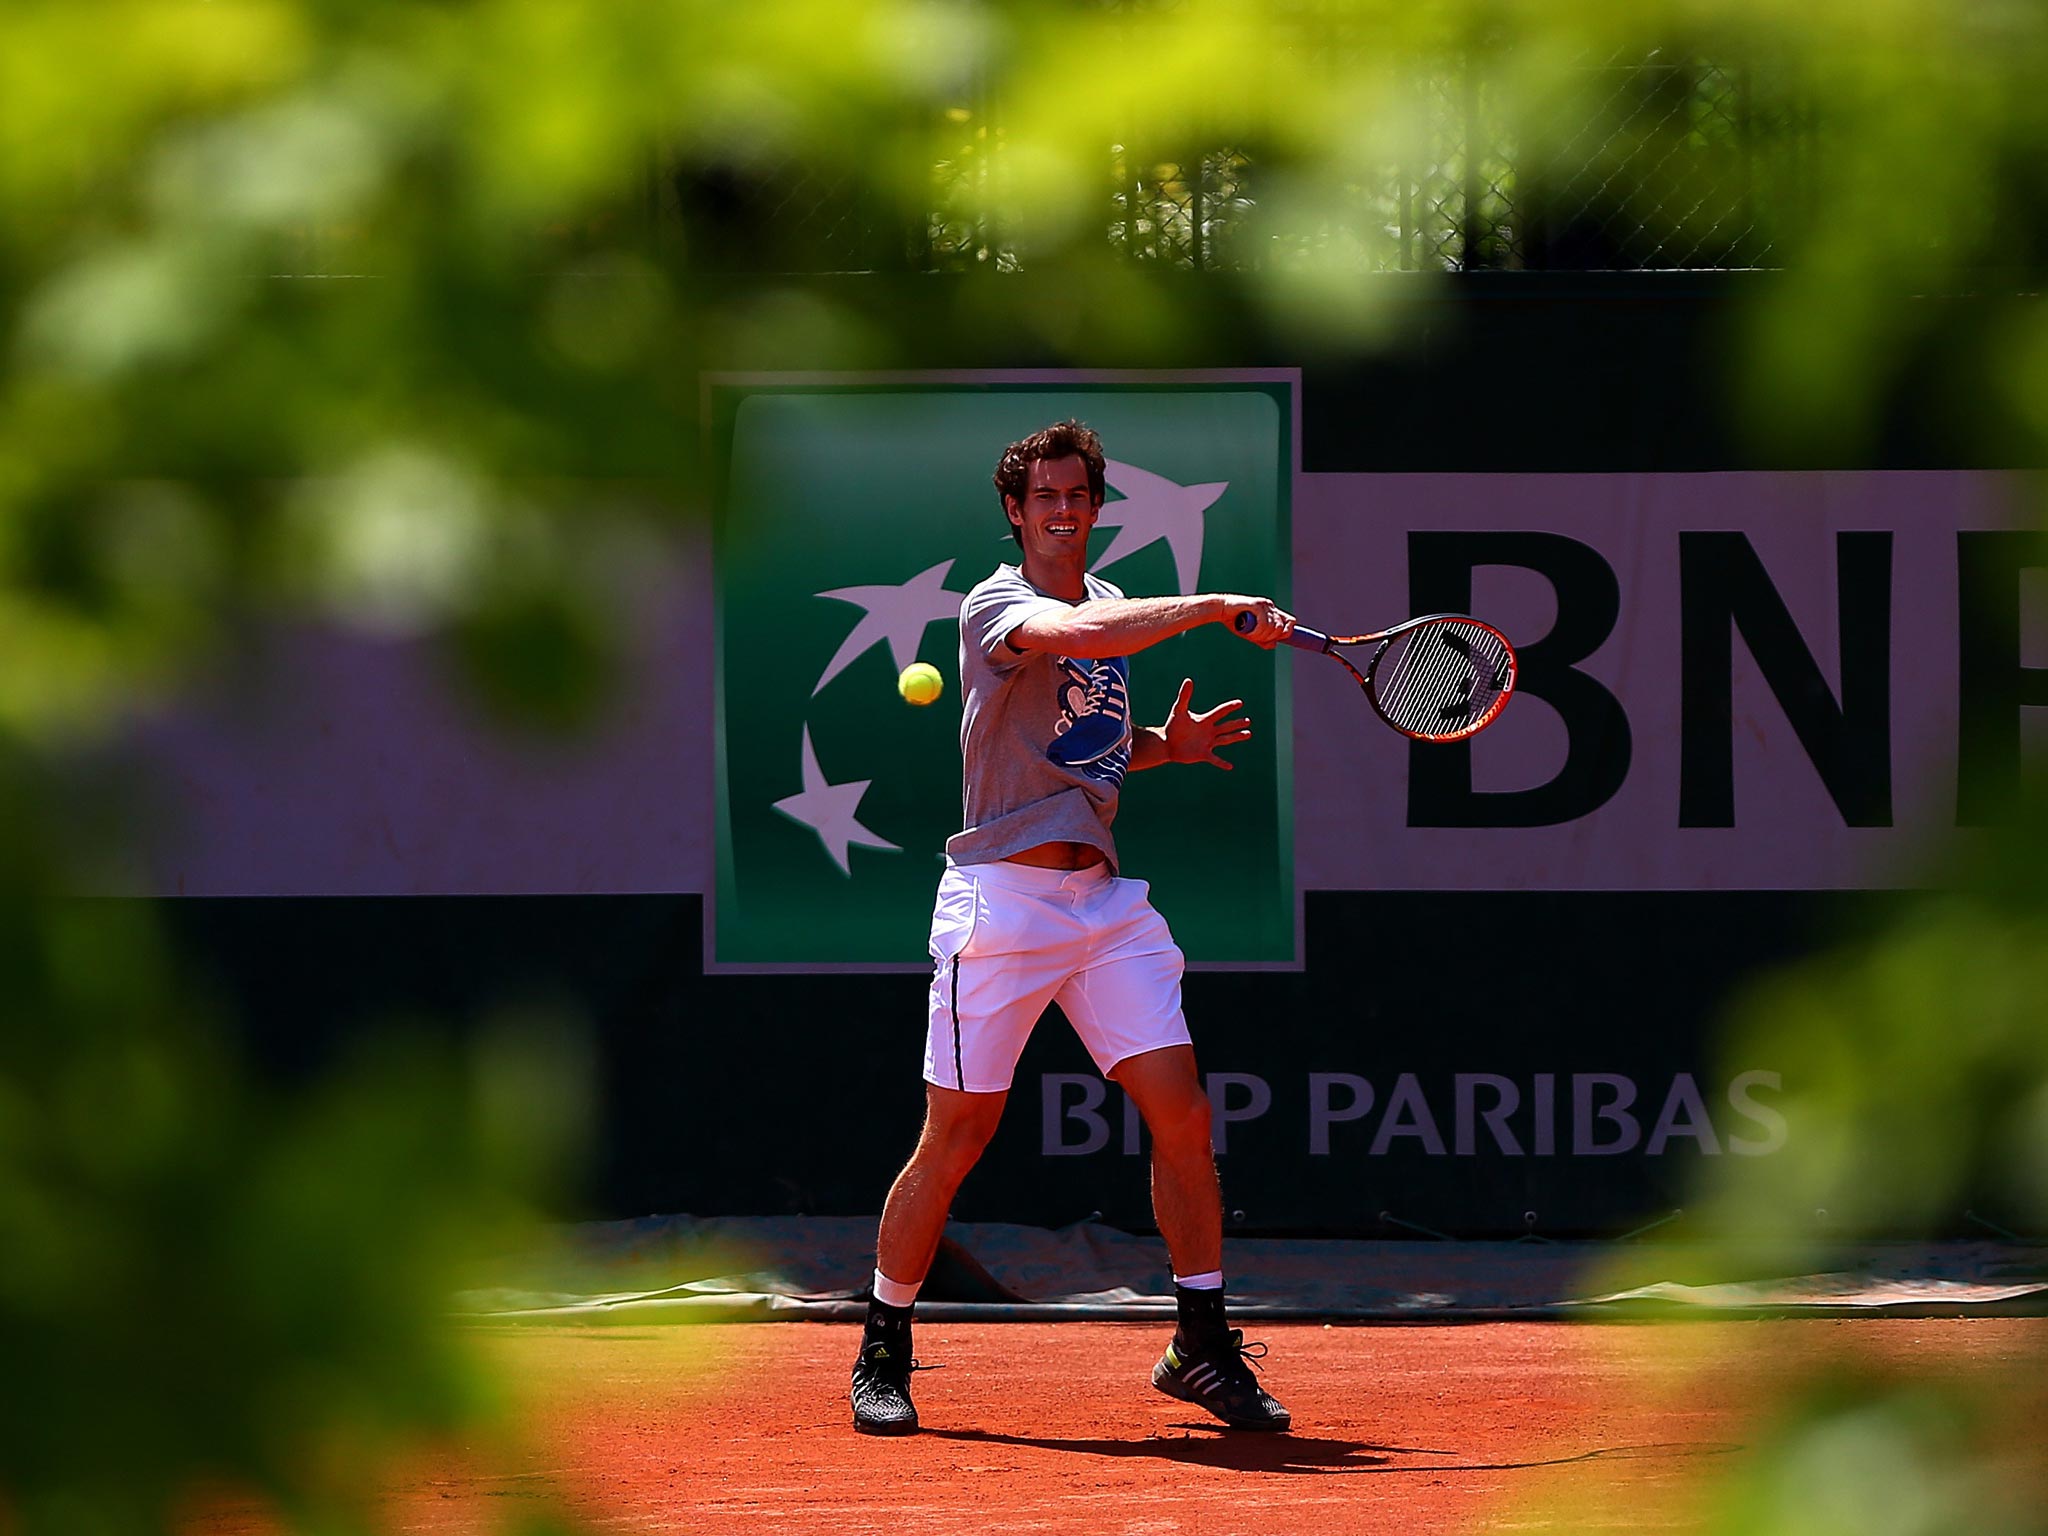 Andy Murray returns a shot during a practice session at Roland Garros yesterday, hoping to deny the world No 1 Rafa Nadal a ninth French Open final place